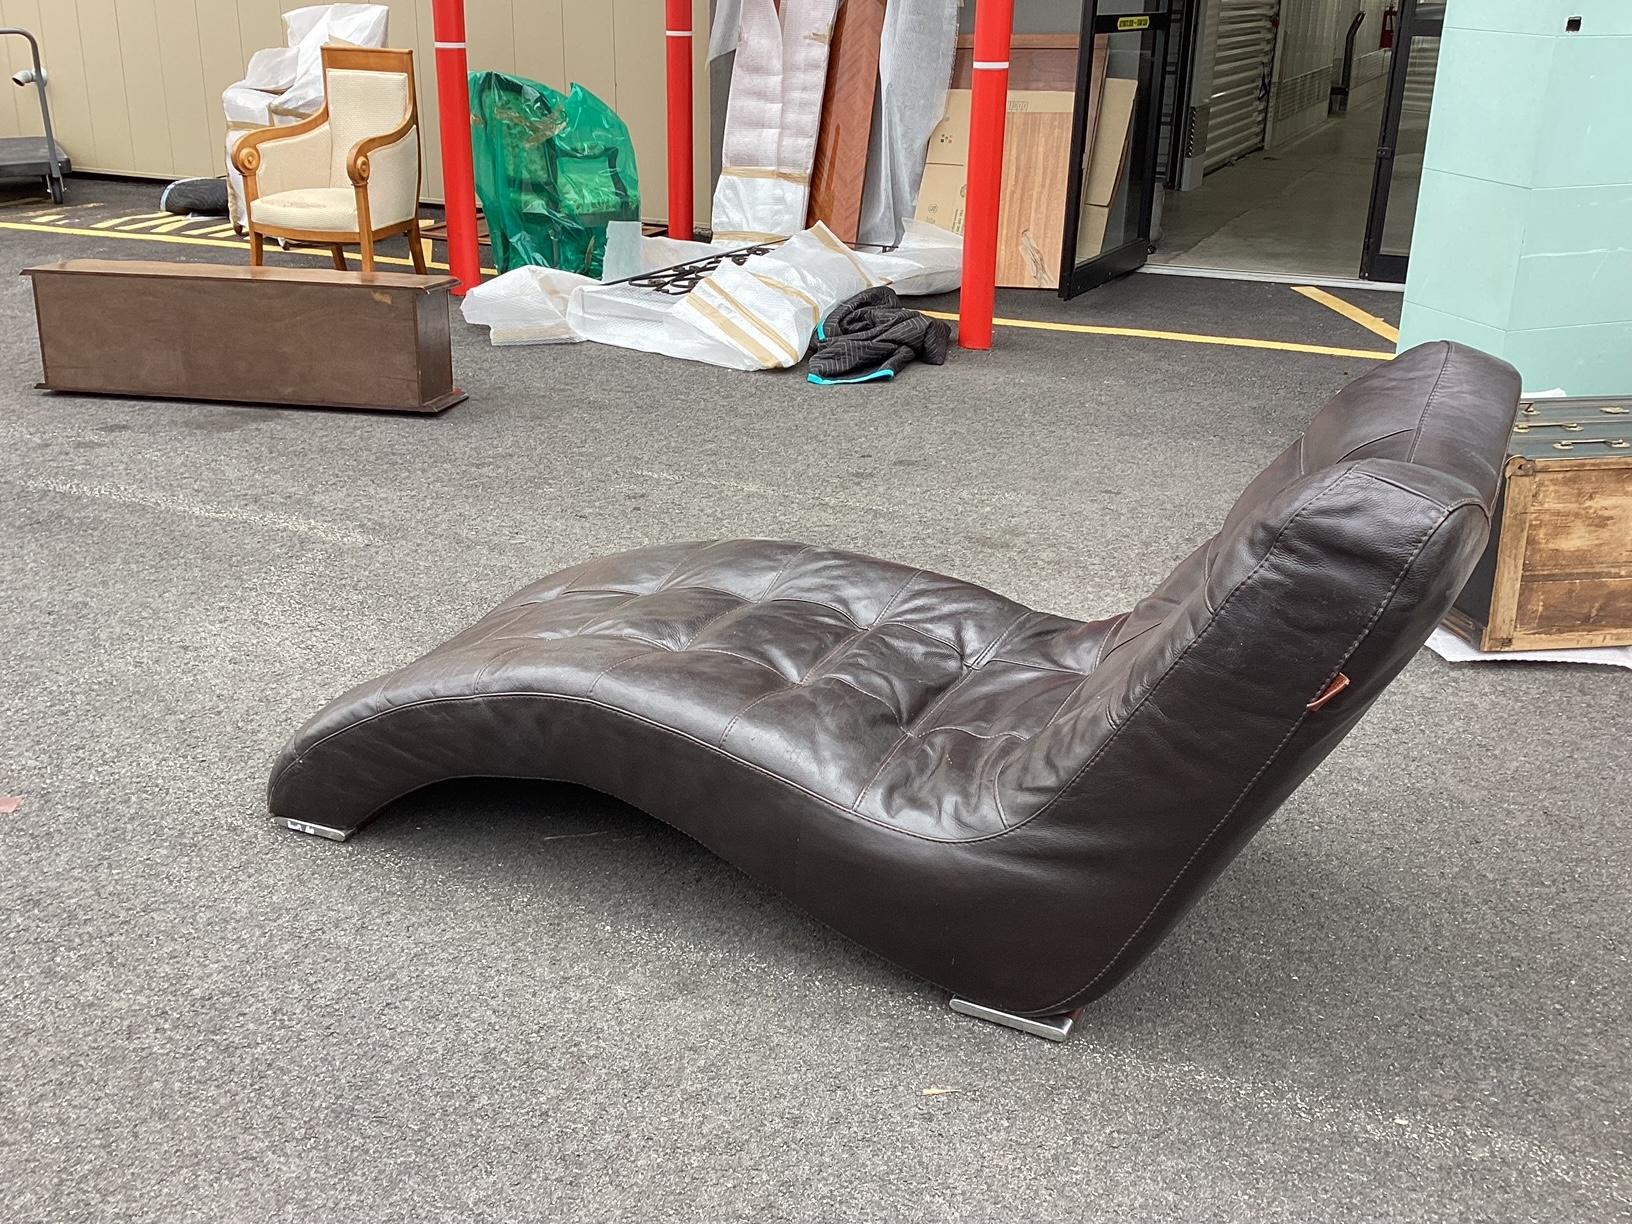 Sizzling Hot Vintage Italian Leather Chaise Longue For Sale 1